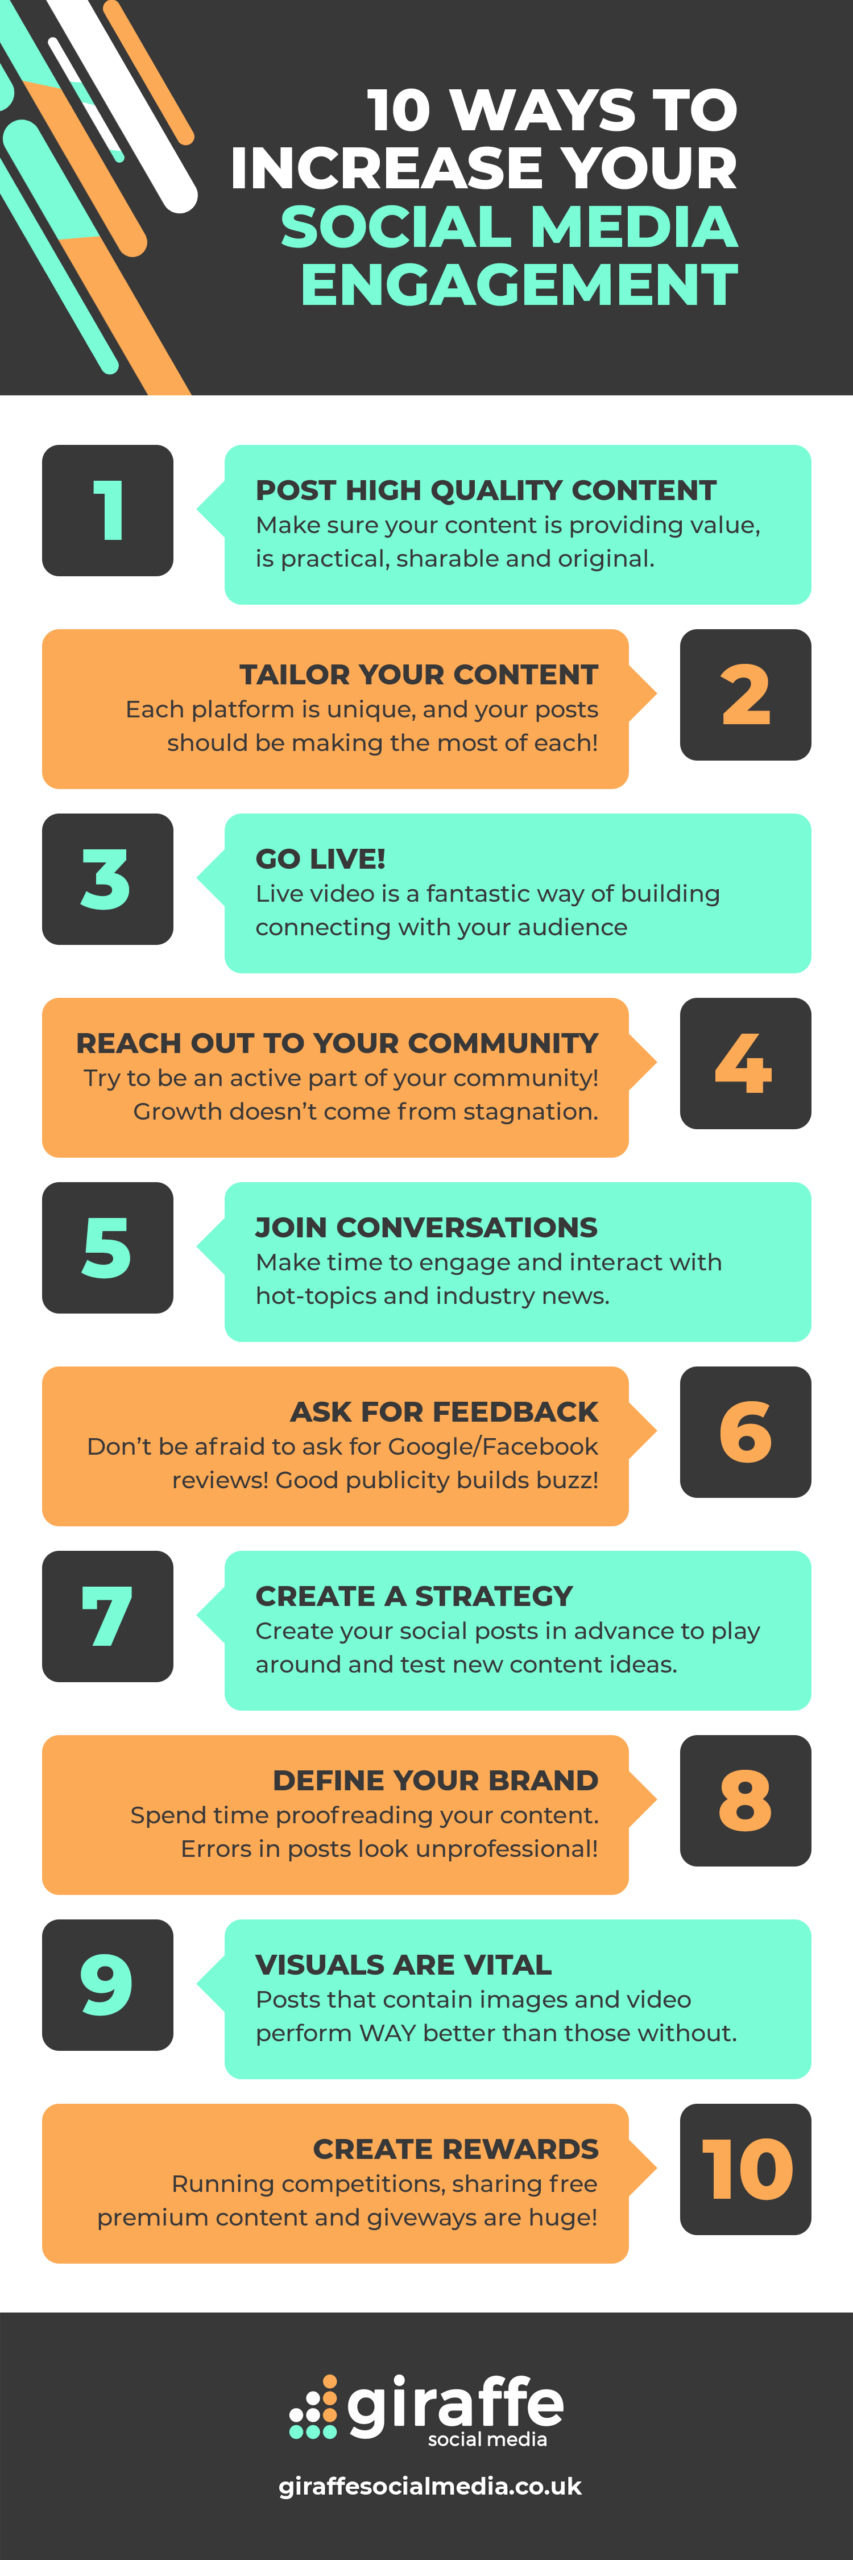 10 Ways to Increase your Social Media Engagament